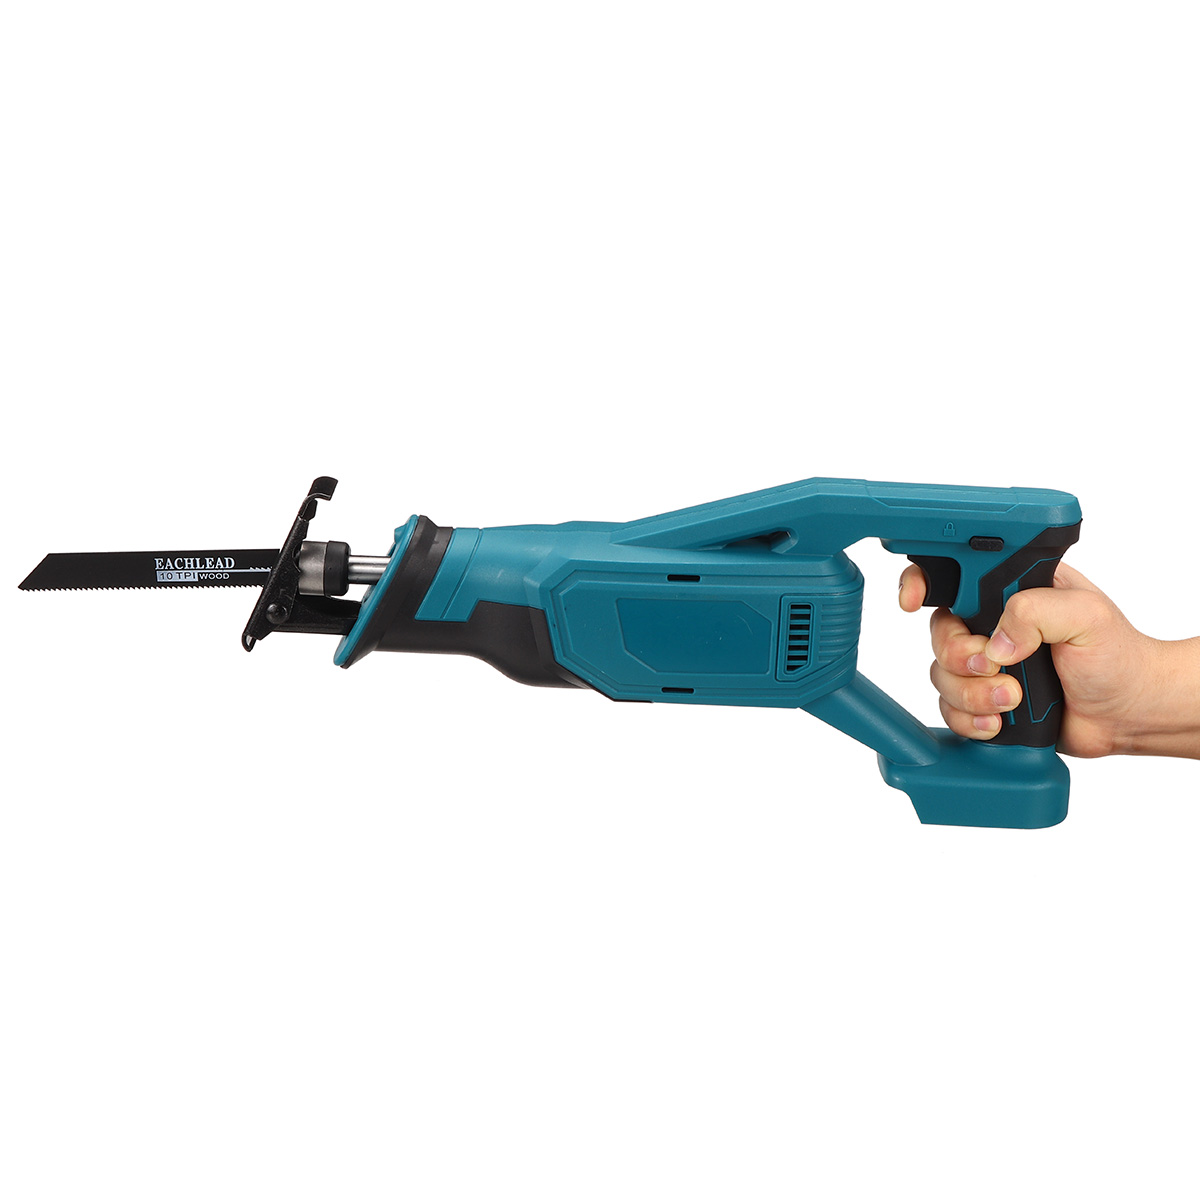 18V-Blue-Electric-Reciprocating-Saw-Variable-Speed-Cordless-Wood-Metal-Cutting-Power-Tools-Set-1716396-2